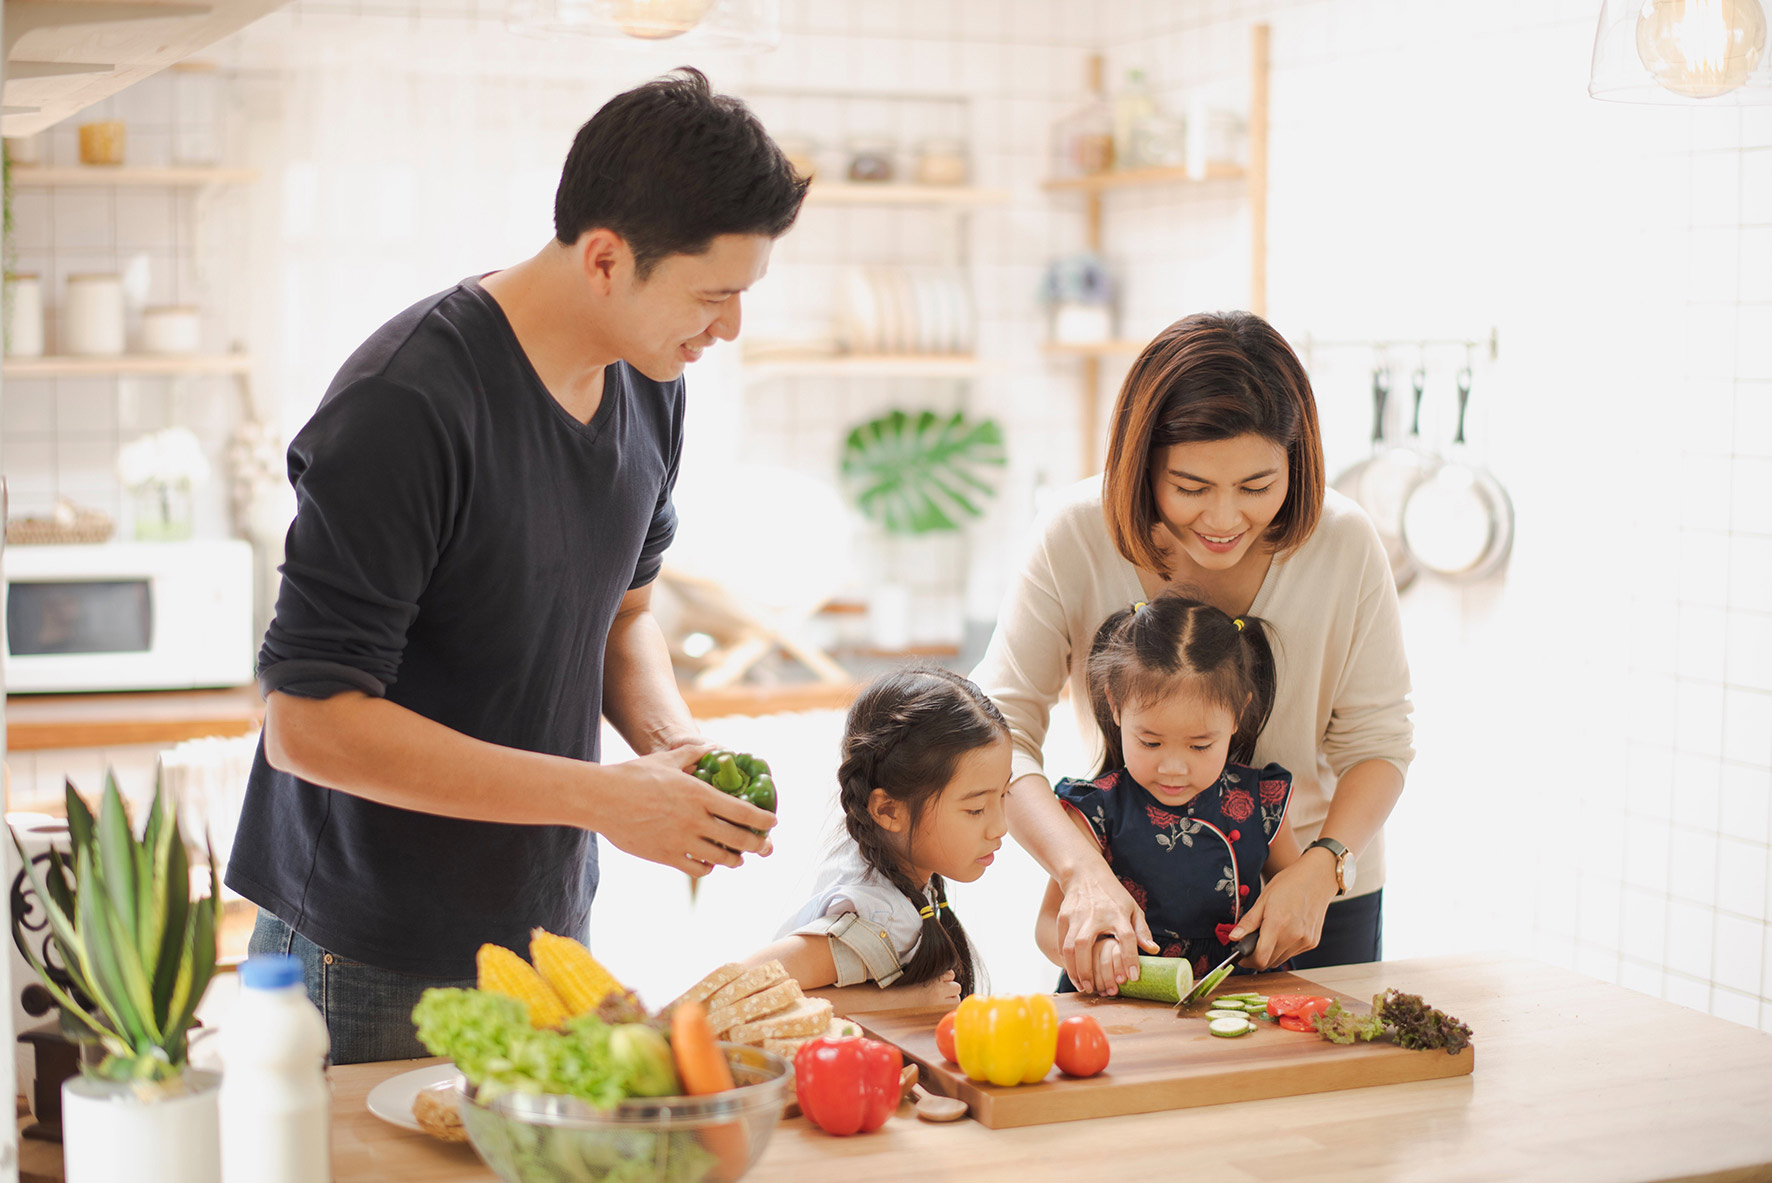 Healthy Living | Family preparing healthy meal for better imunity